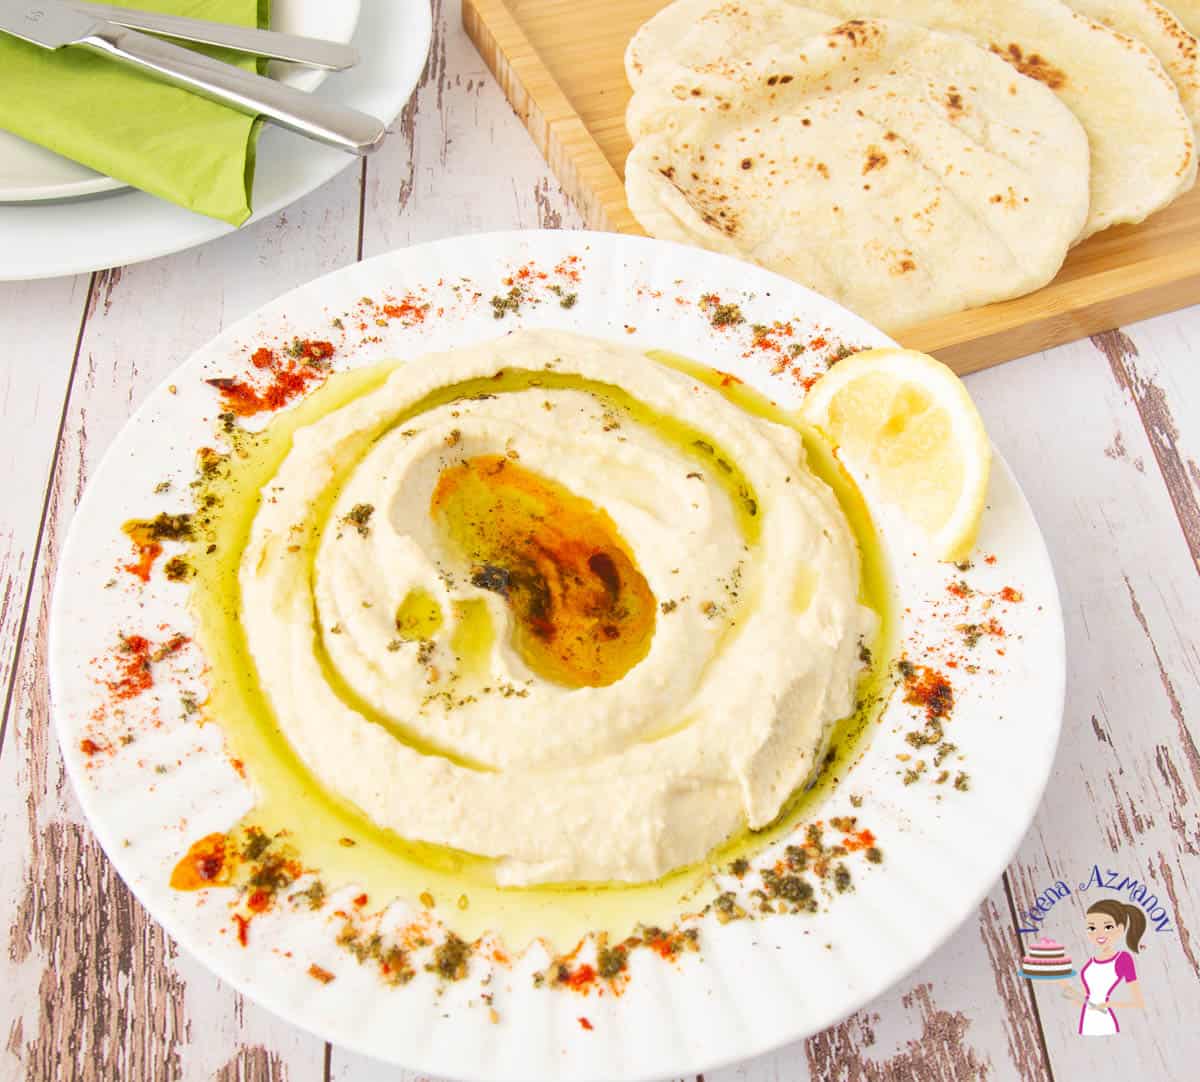 A plate of hummus.